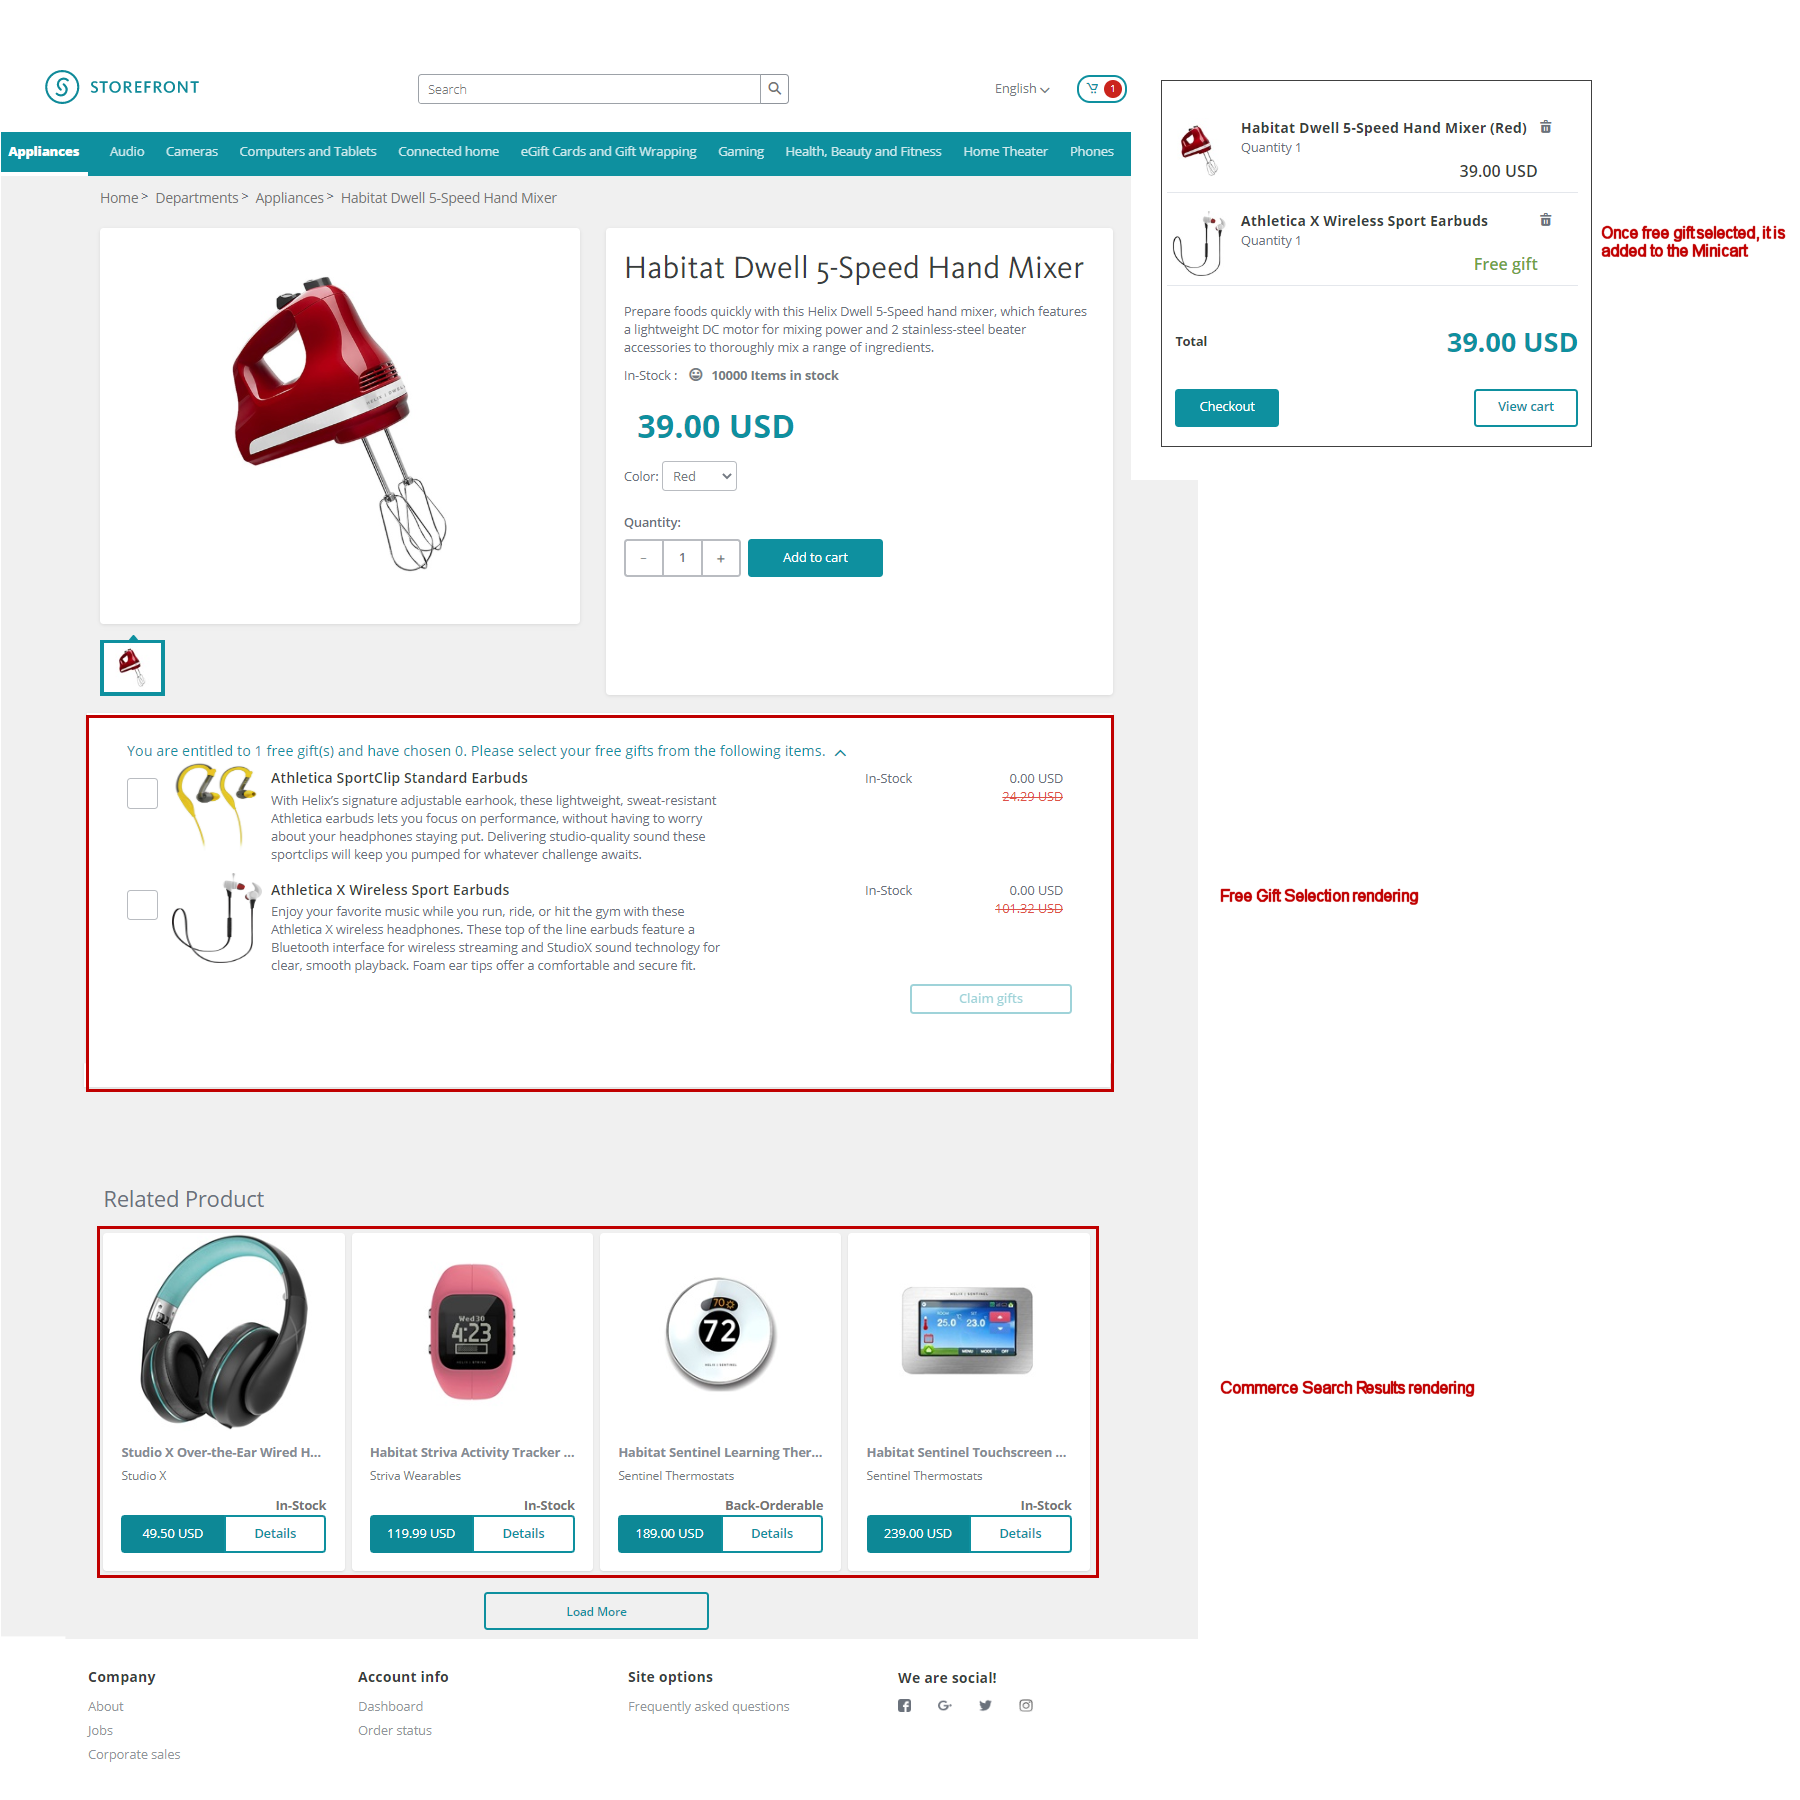 Example of the product page on the live storefront.